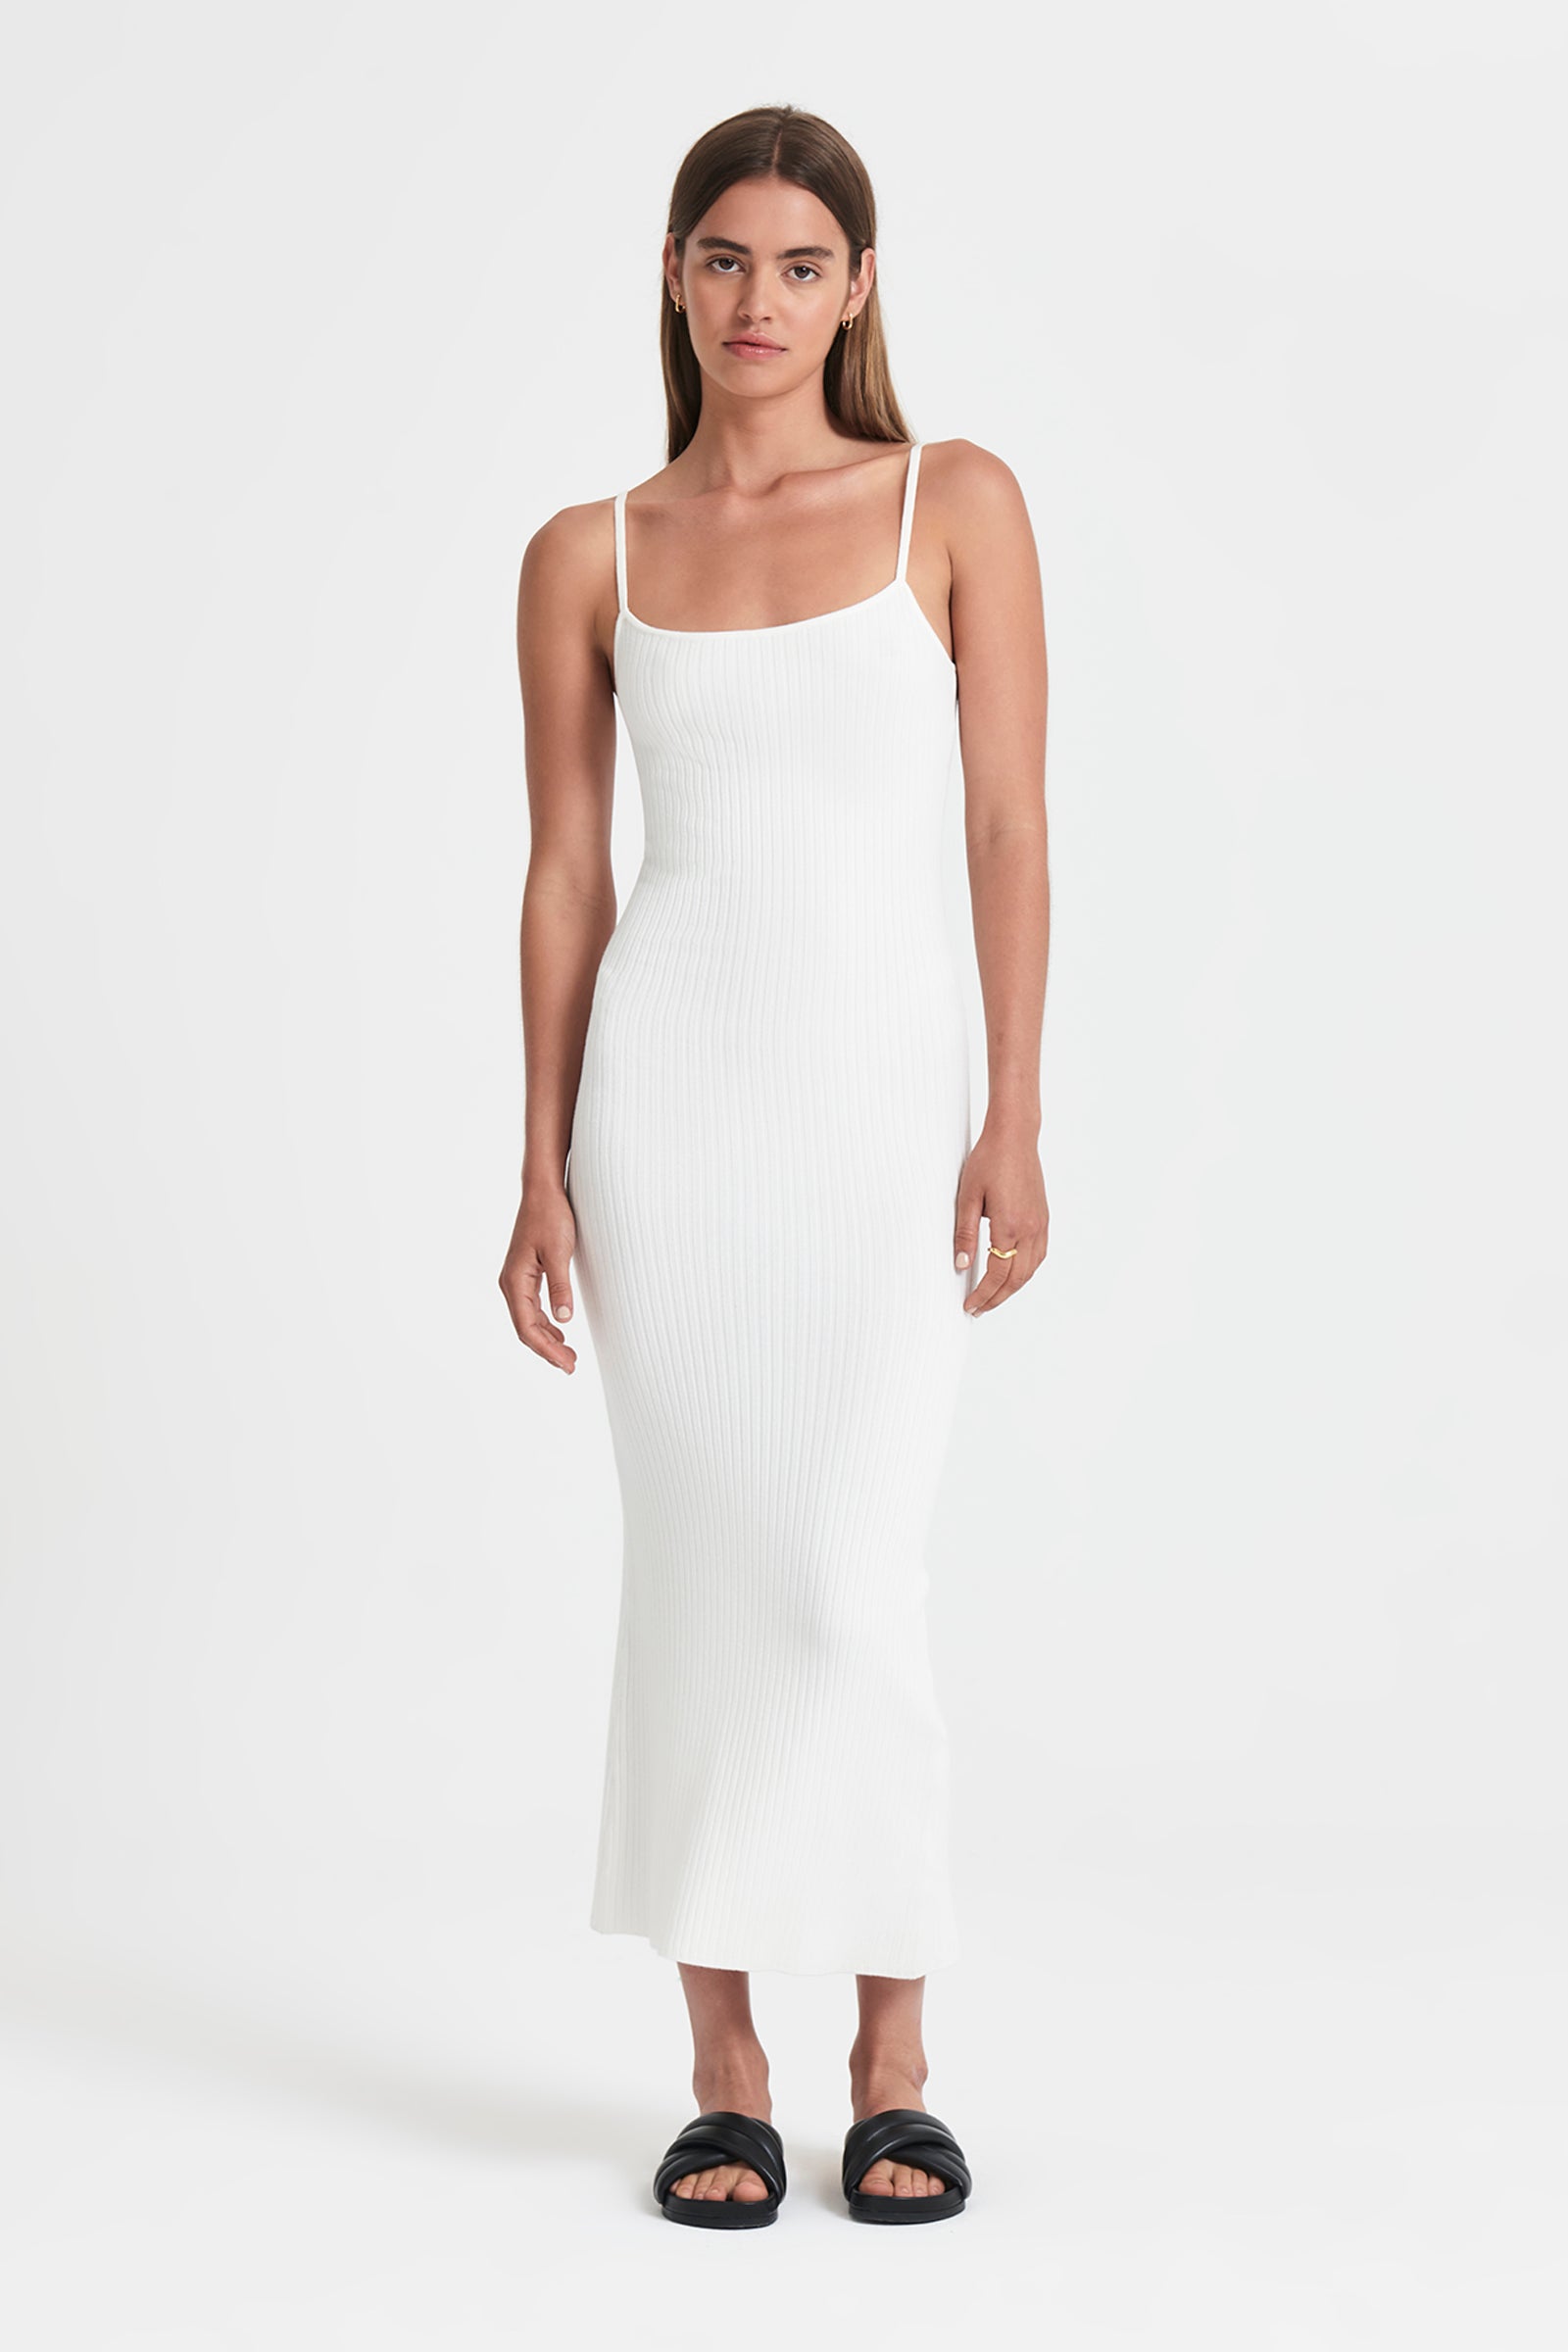 Nude Lucy Xin Maxi Dress in White